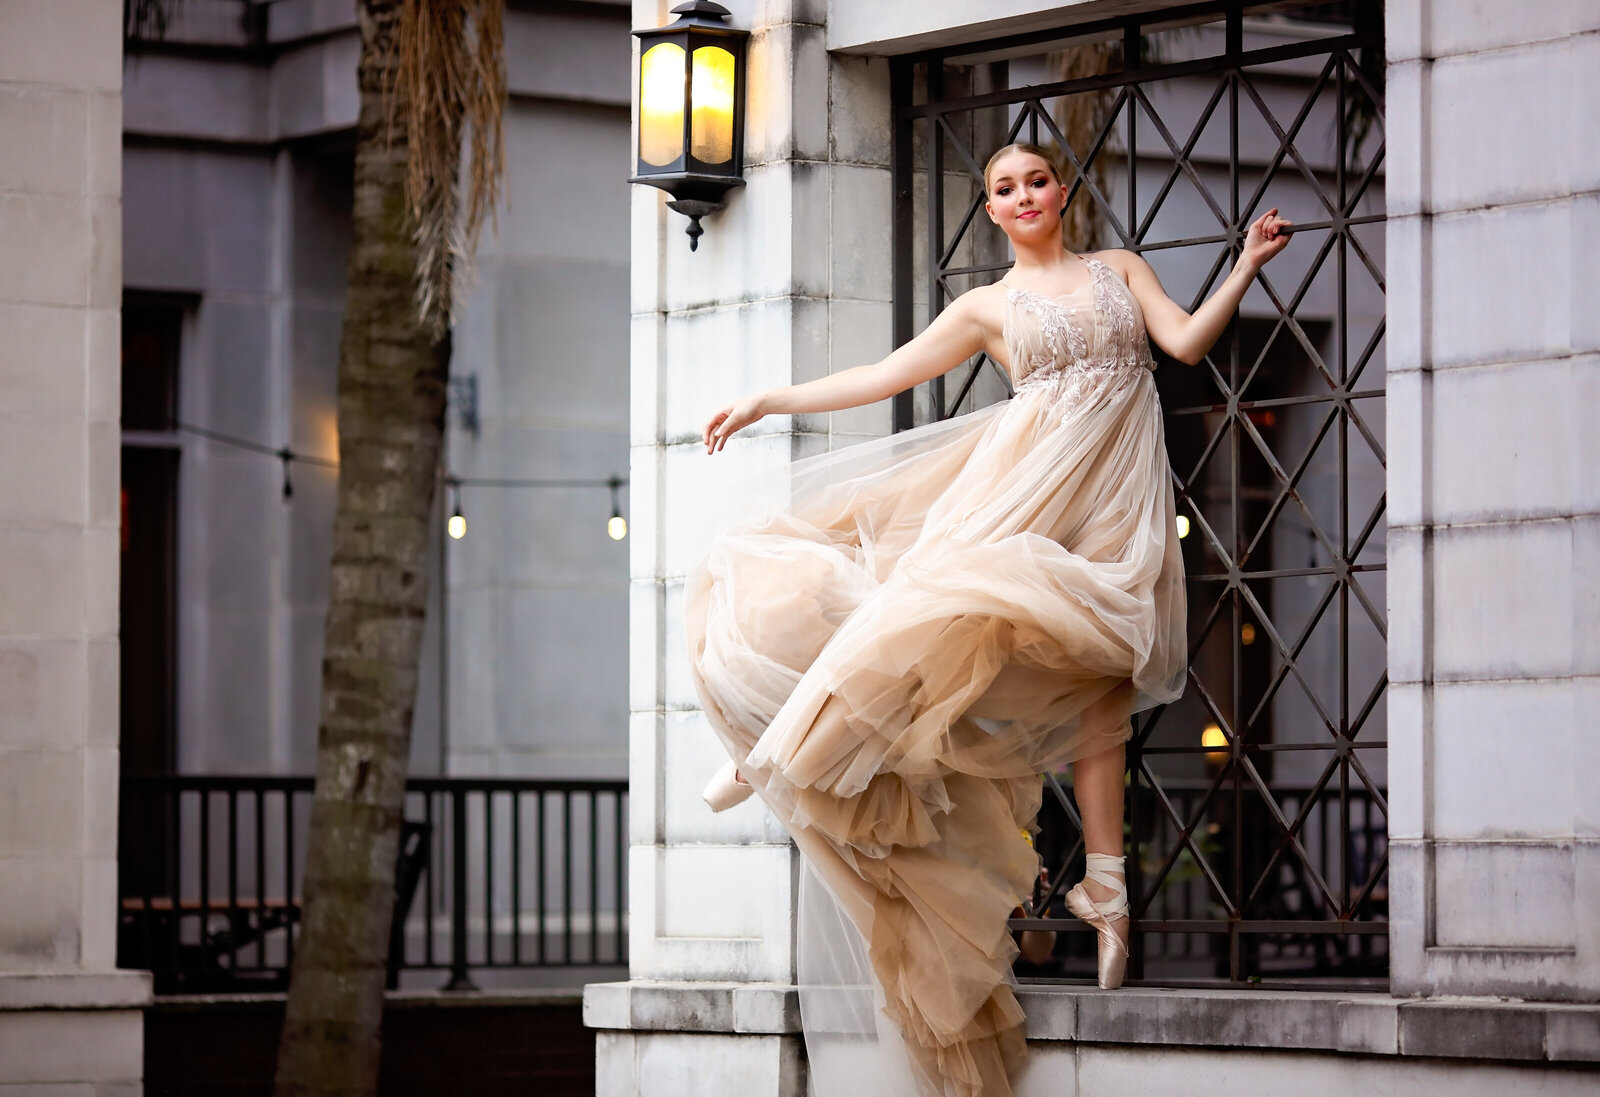 Savannah Boudoir Photography and Glamour showcases gorgeous blond dancer in flowing glamour gown on pointe in window